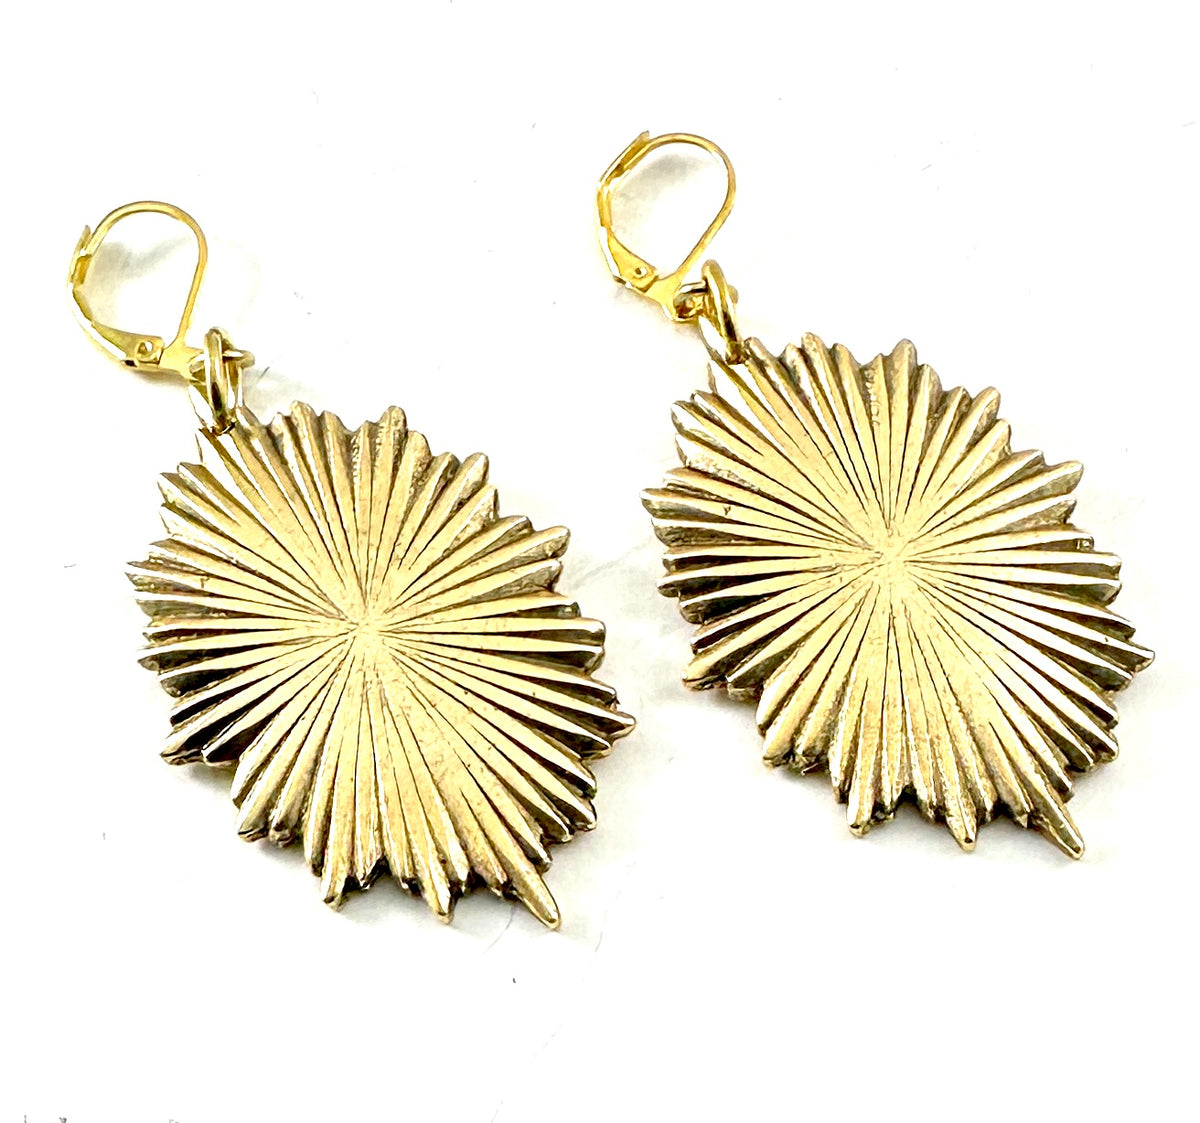 Vintage Casting Collection - Starburst Earrings